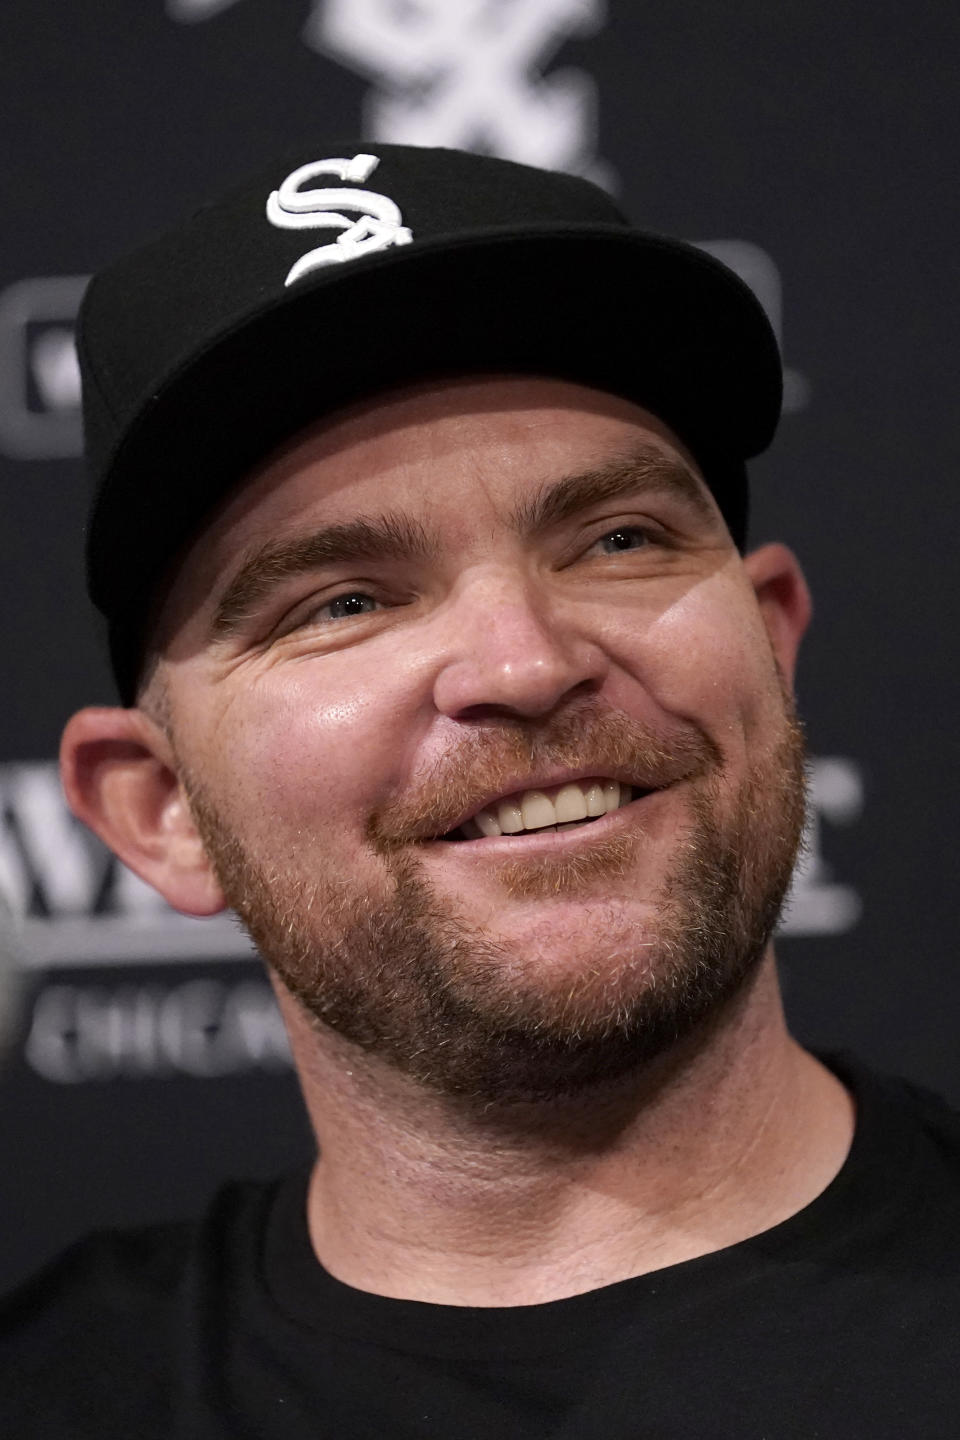 Chicago White Sox's Liam Hendriks smiles as he talks to reporters before a baseball game between the White Sox and the Minnesota Twins on Wednesday, May 3, 2023, in Chicago. (AP Photo/Charles Rex Arbogast)